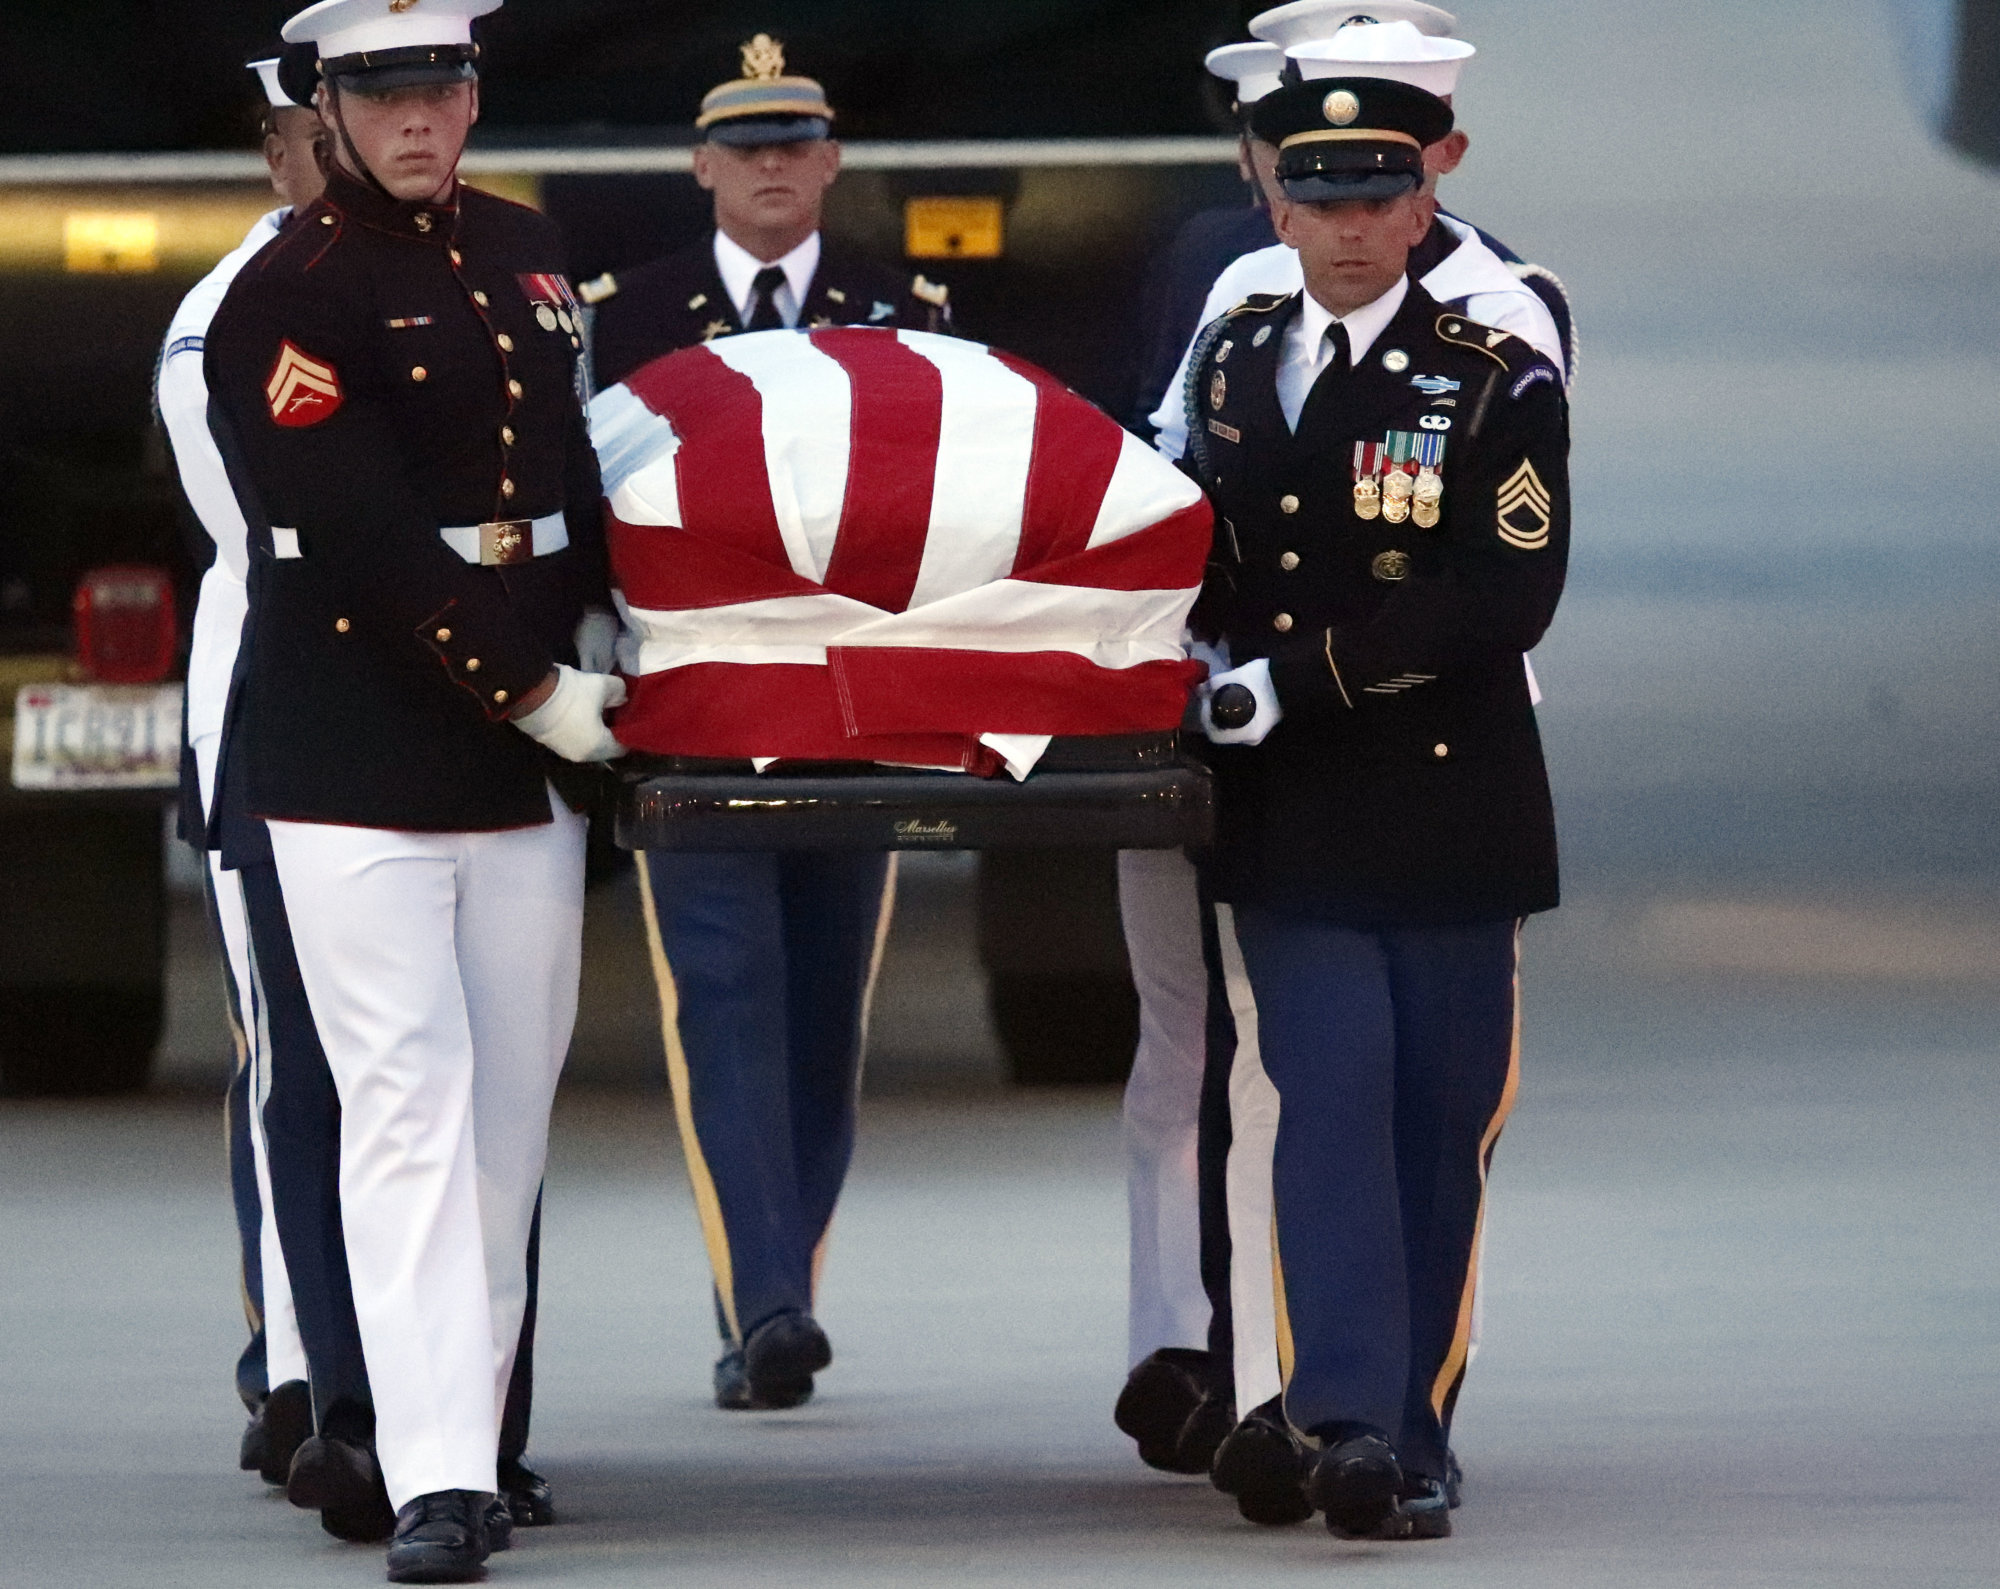 The flag-draped casket of Sen. John McCain, R-Ariz., is carried by an Armed Forces body bearer team to a hearse, Thursday, Aug. 30, 2018, at Andrews Air Force Base, Md. (AP Photo/Alex Brandon)